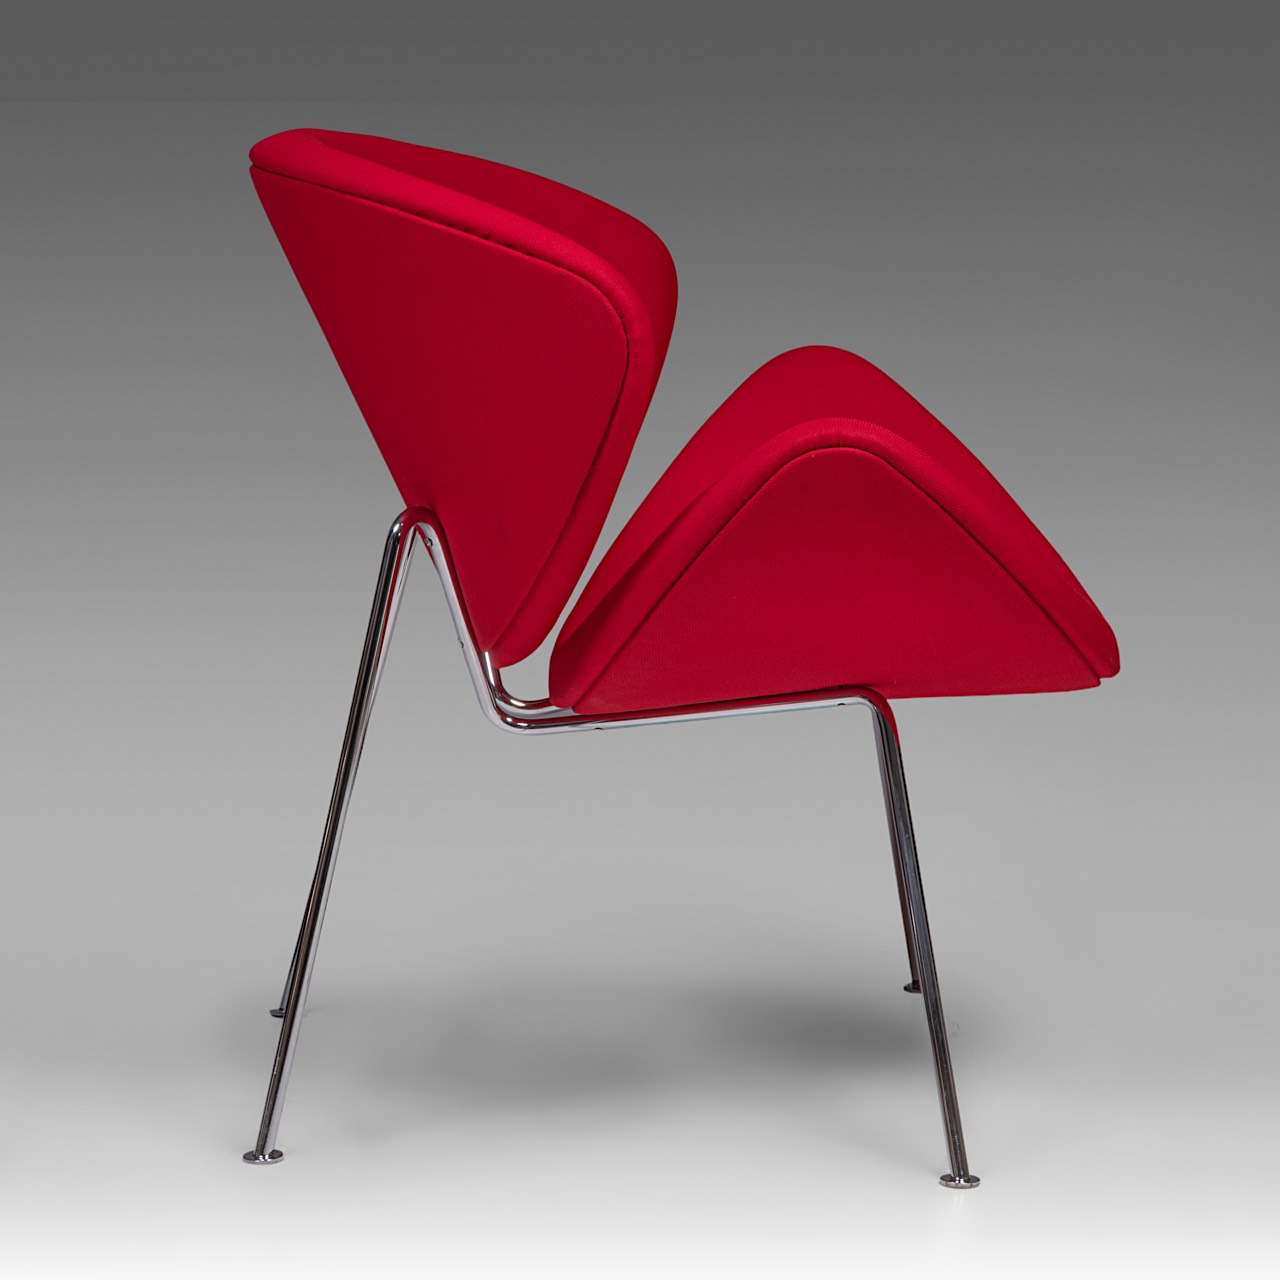 An Orange Slice chair by Pierre Pauline for Artifort, H 85 - W 82 cm - Image 6 of 9